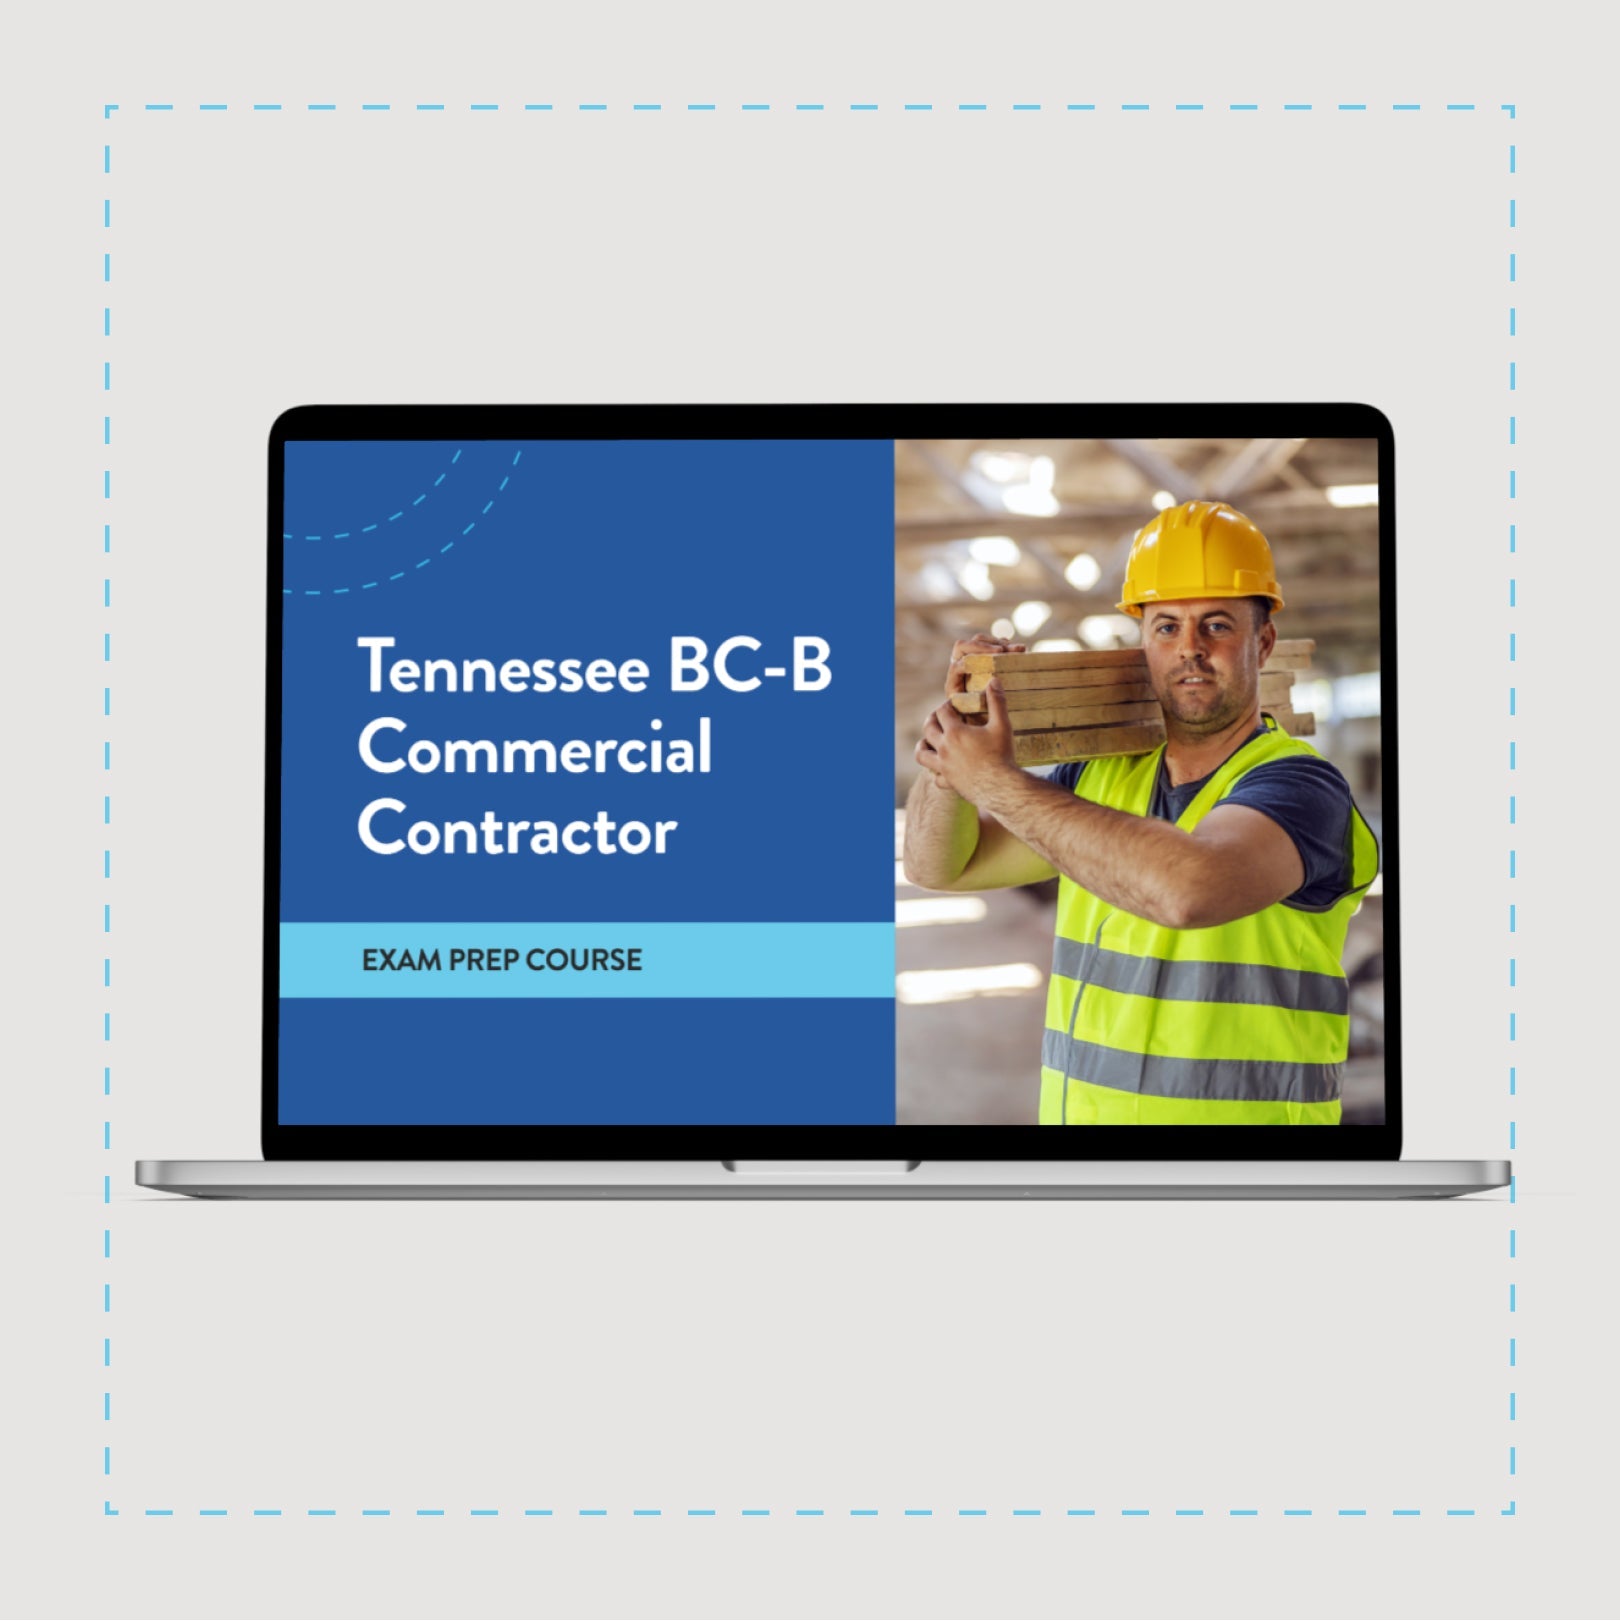 Tennessee BC-B Commercial Contractor Exam Prep Course